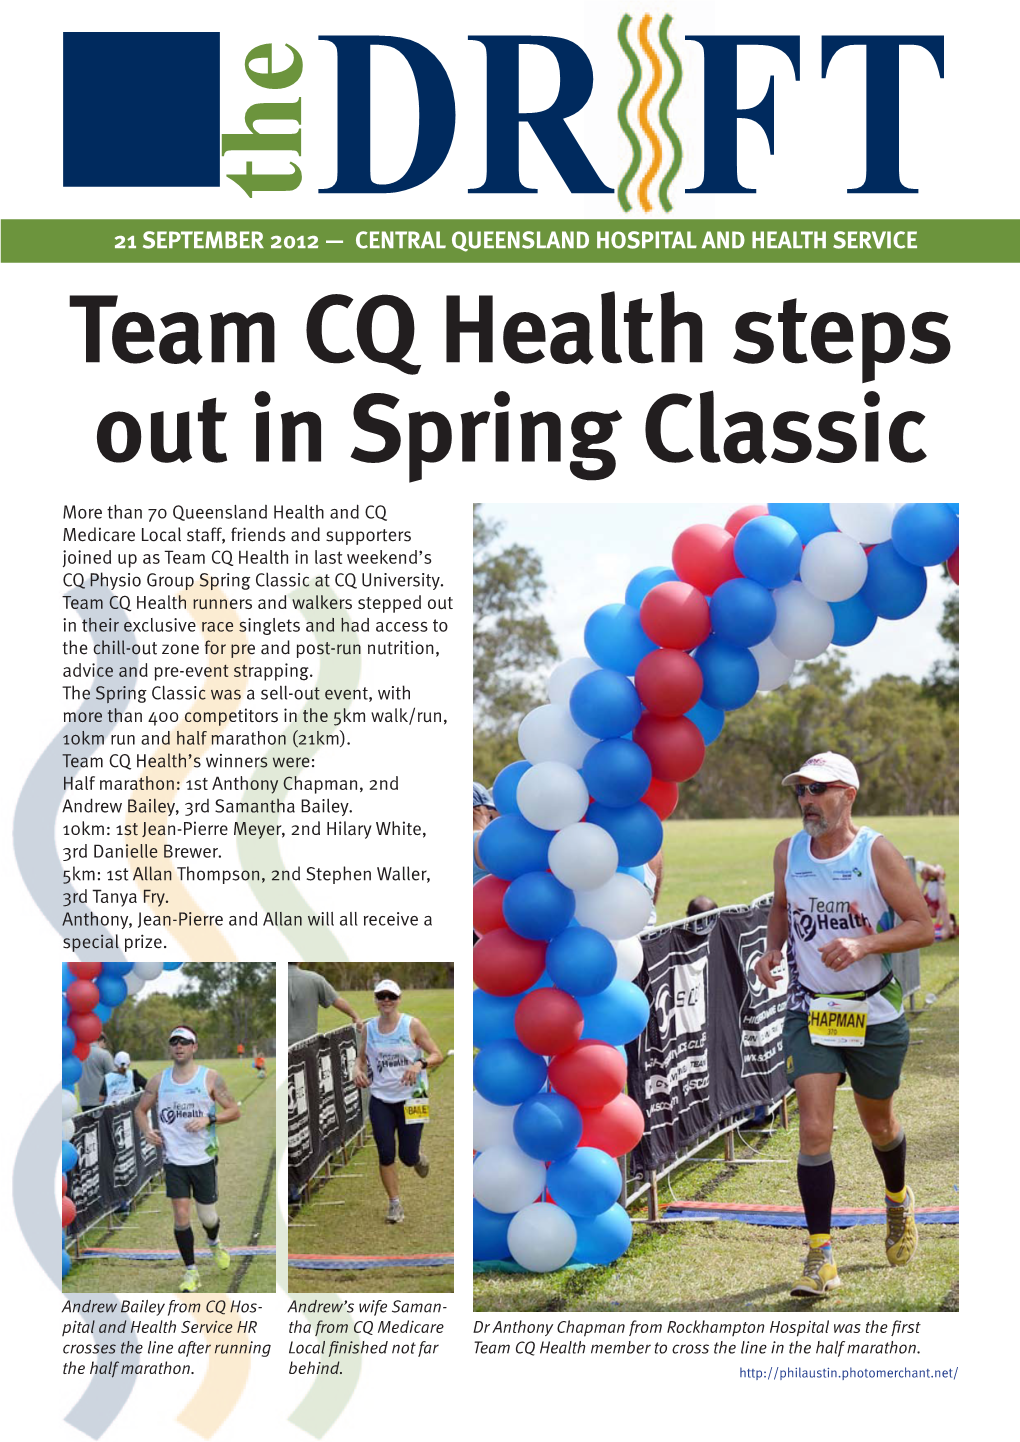 Team CQ Health Steps out in Spring Classic